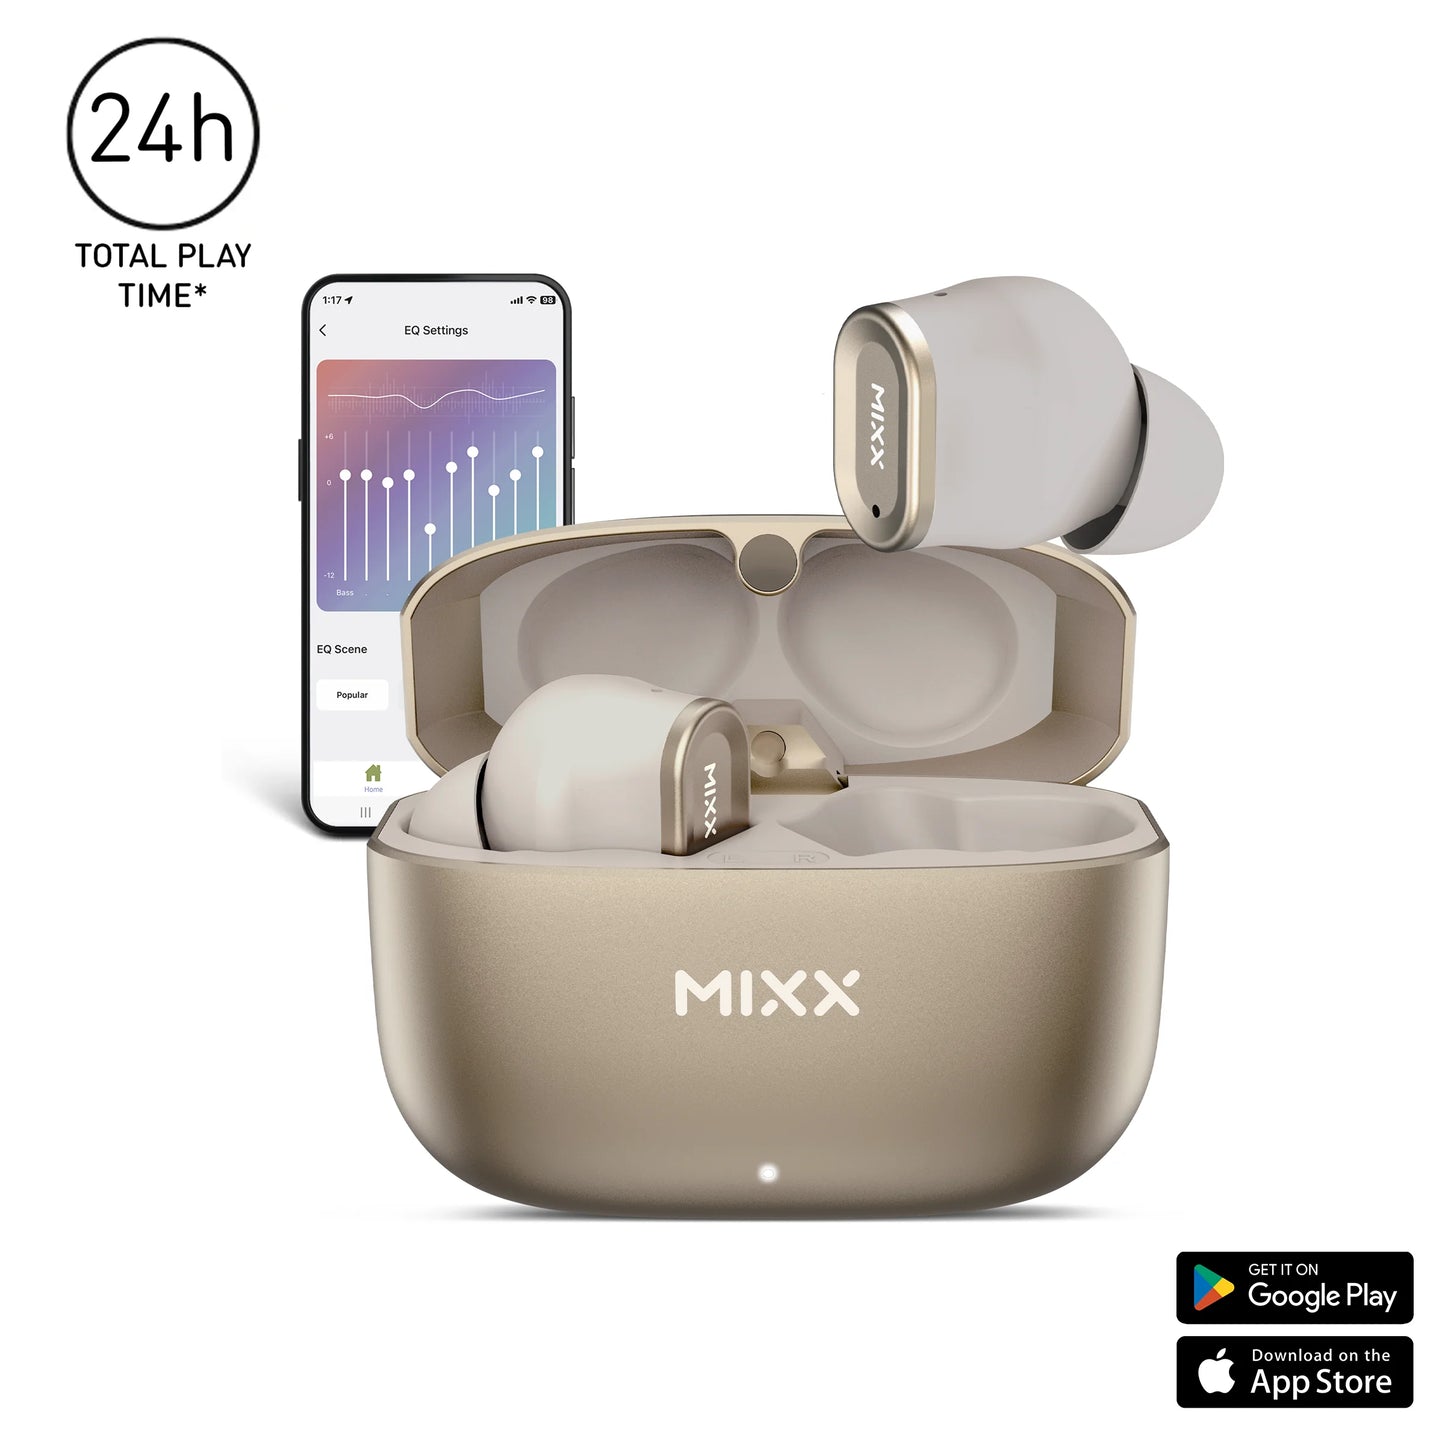 Mixx StreamBuds Custom 1 - True Wireless Earbuds with Charging Case - Unique Capsule Design Bluetooth Earbuds (Champagne Gold)